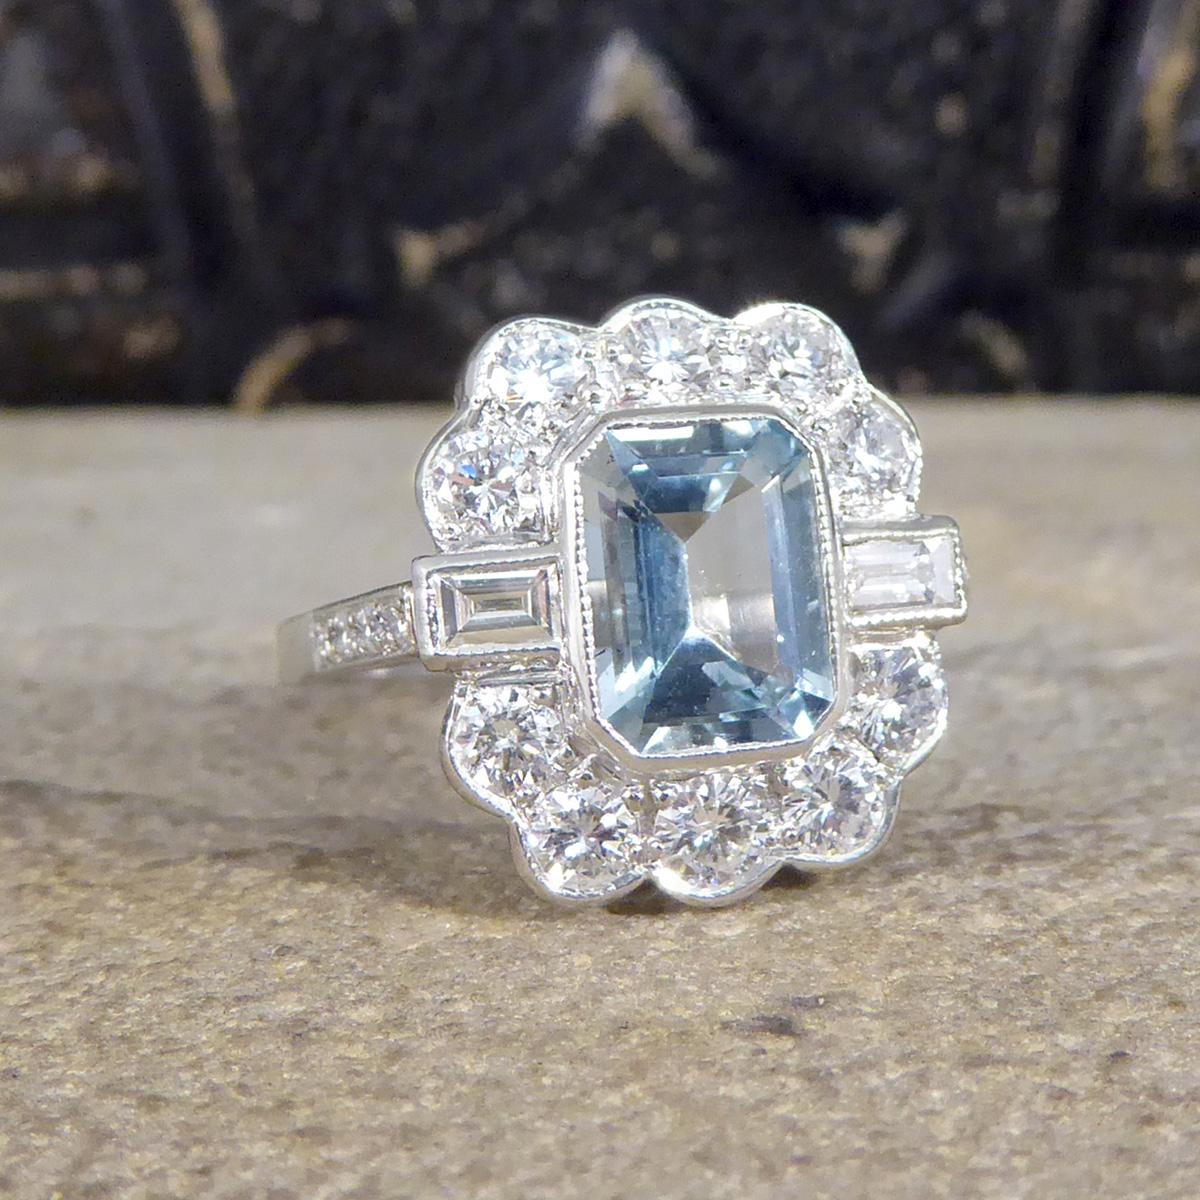 This lovely 1.30ct Emerald cut Aquamarine is surrounded by 5 brilliant cut diamonds along the top and the bottom of the stone with two baguette cut diamonds running horizontal through the middle creating a cluster. The Aquamarine is fairly light in